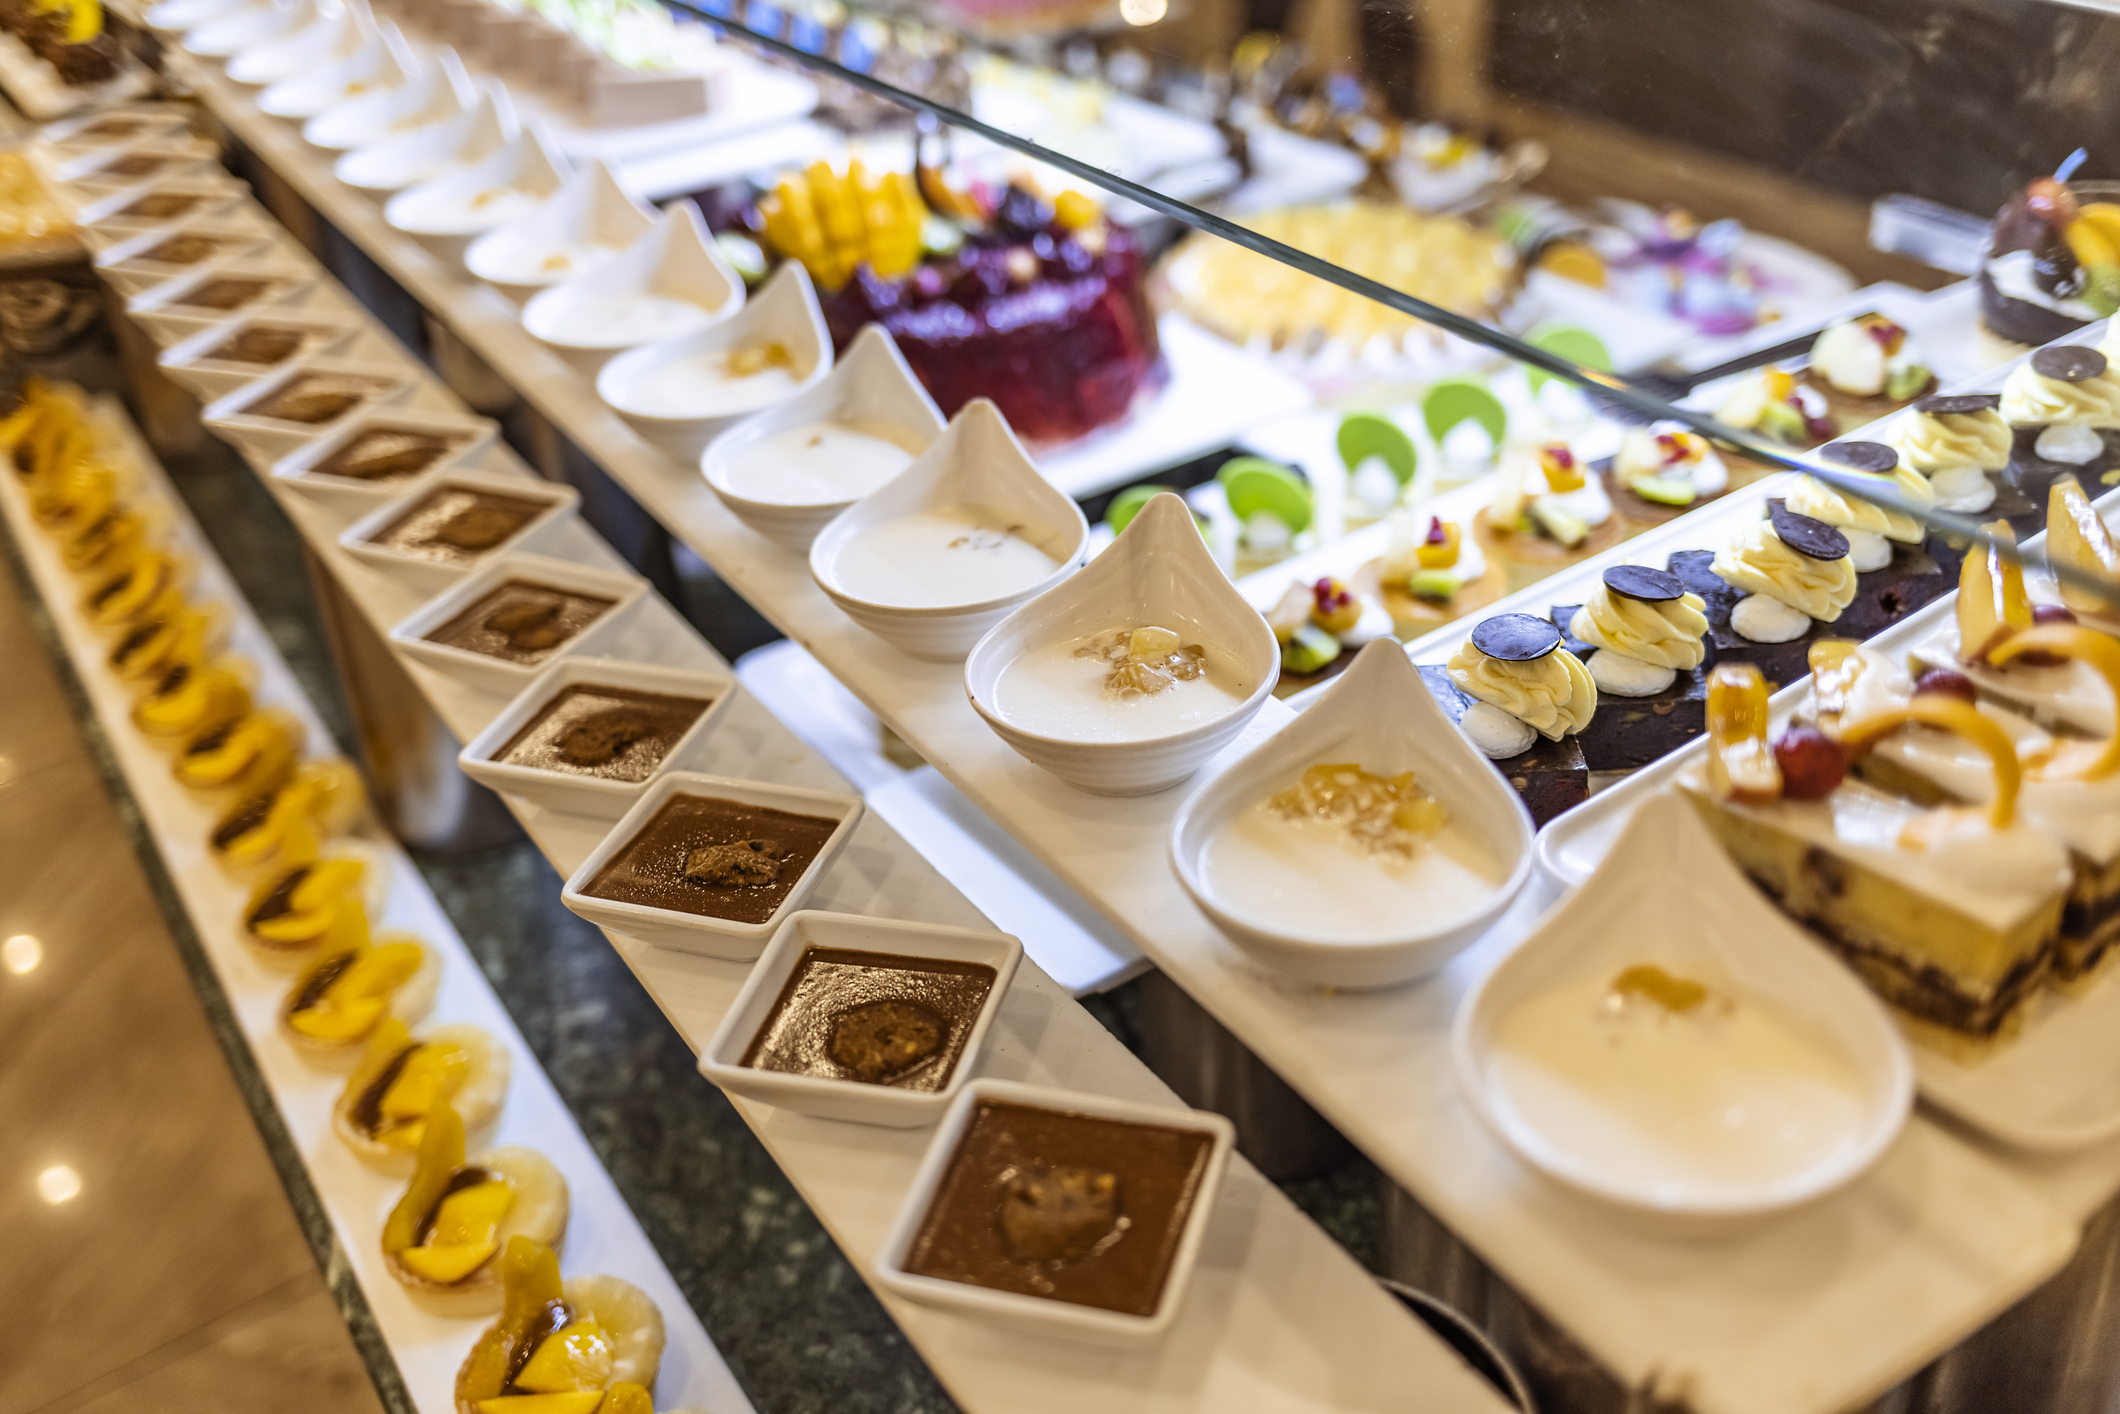 A lavish dessert buffet with various pastries, puddings, cakes, and custards arranged in a sophisticated presentation